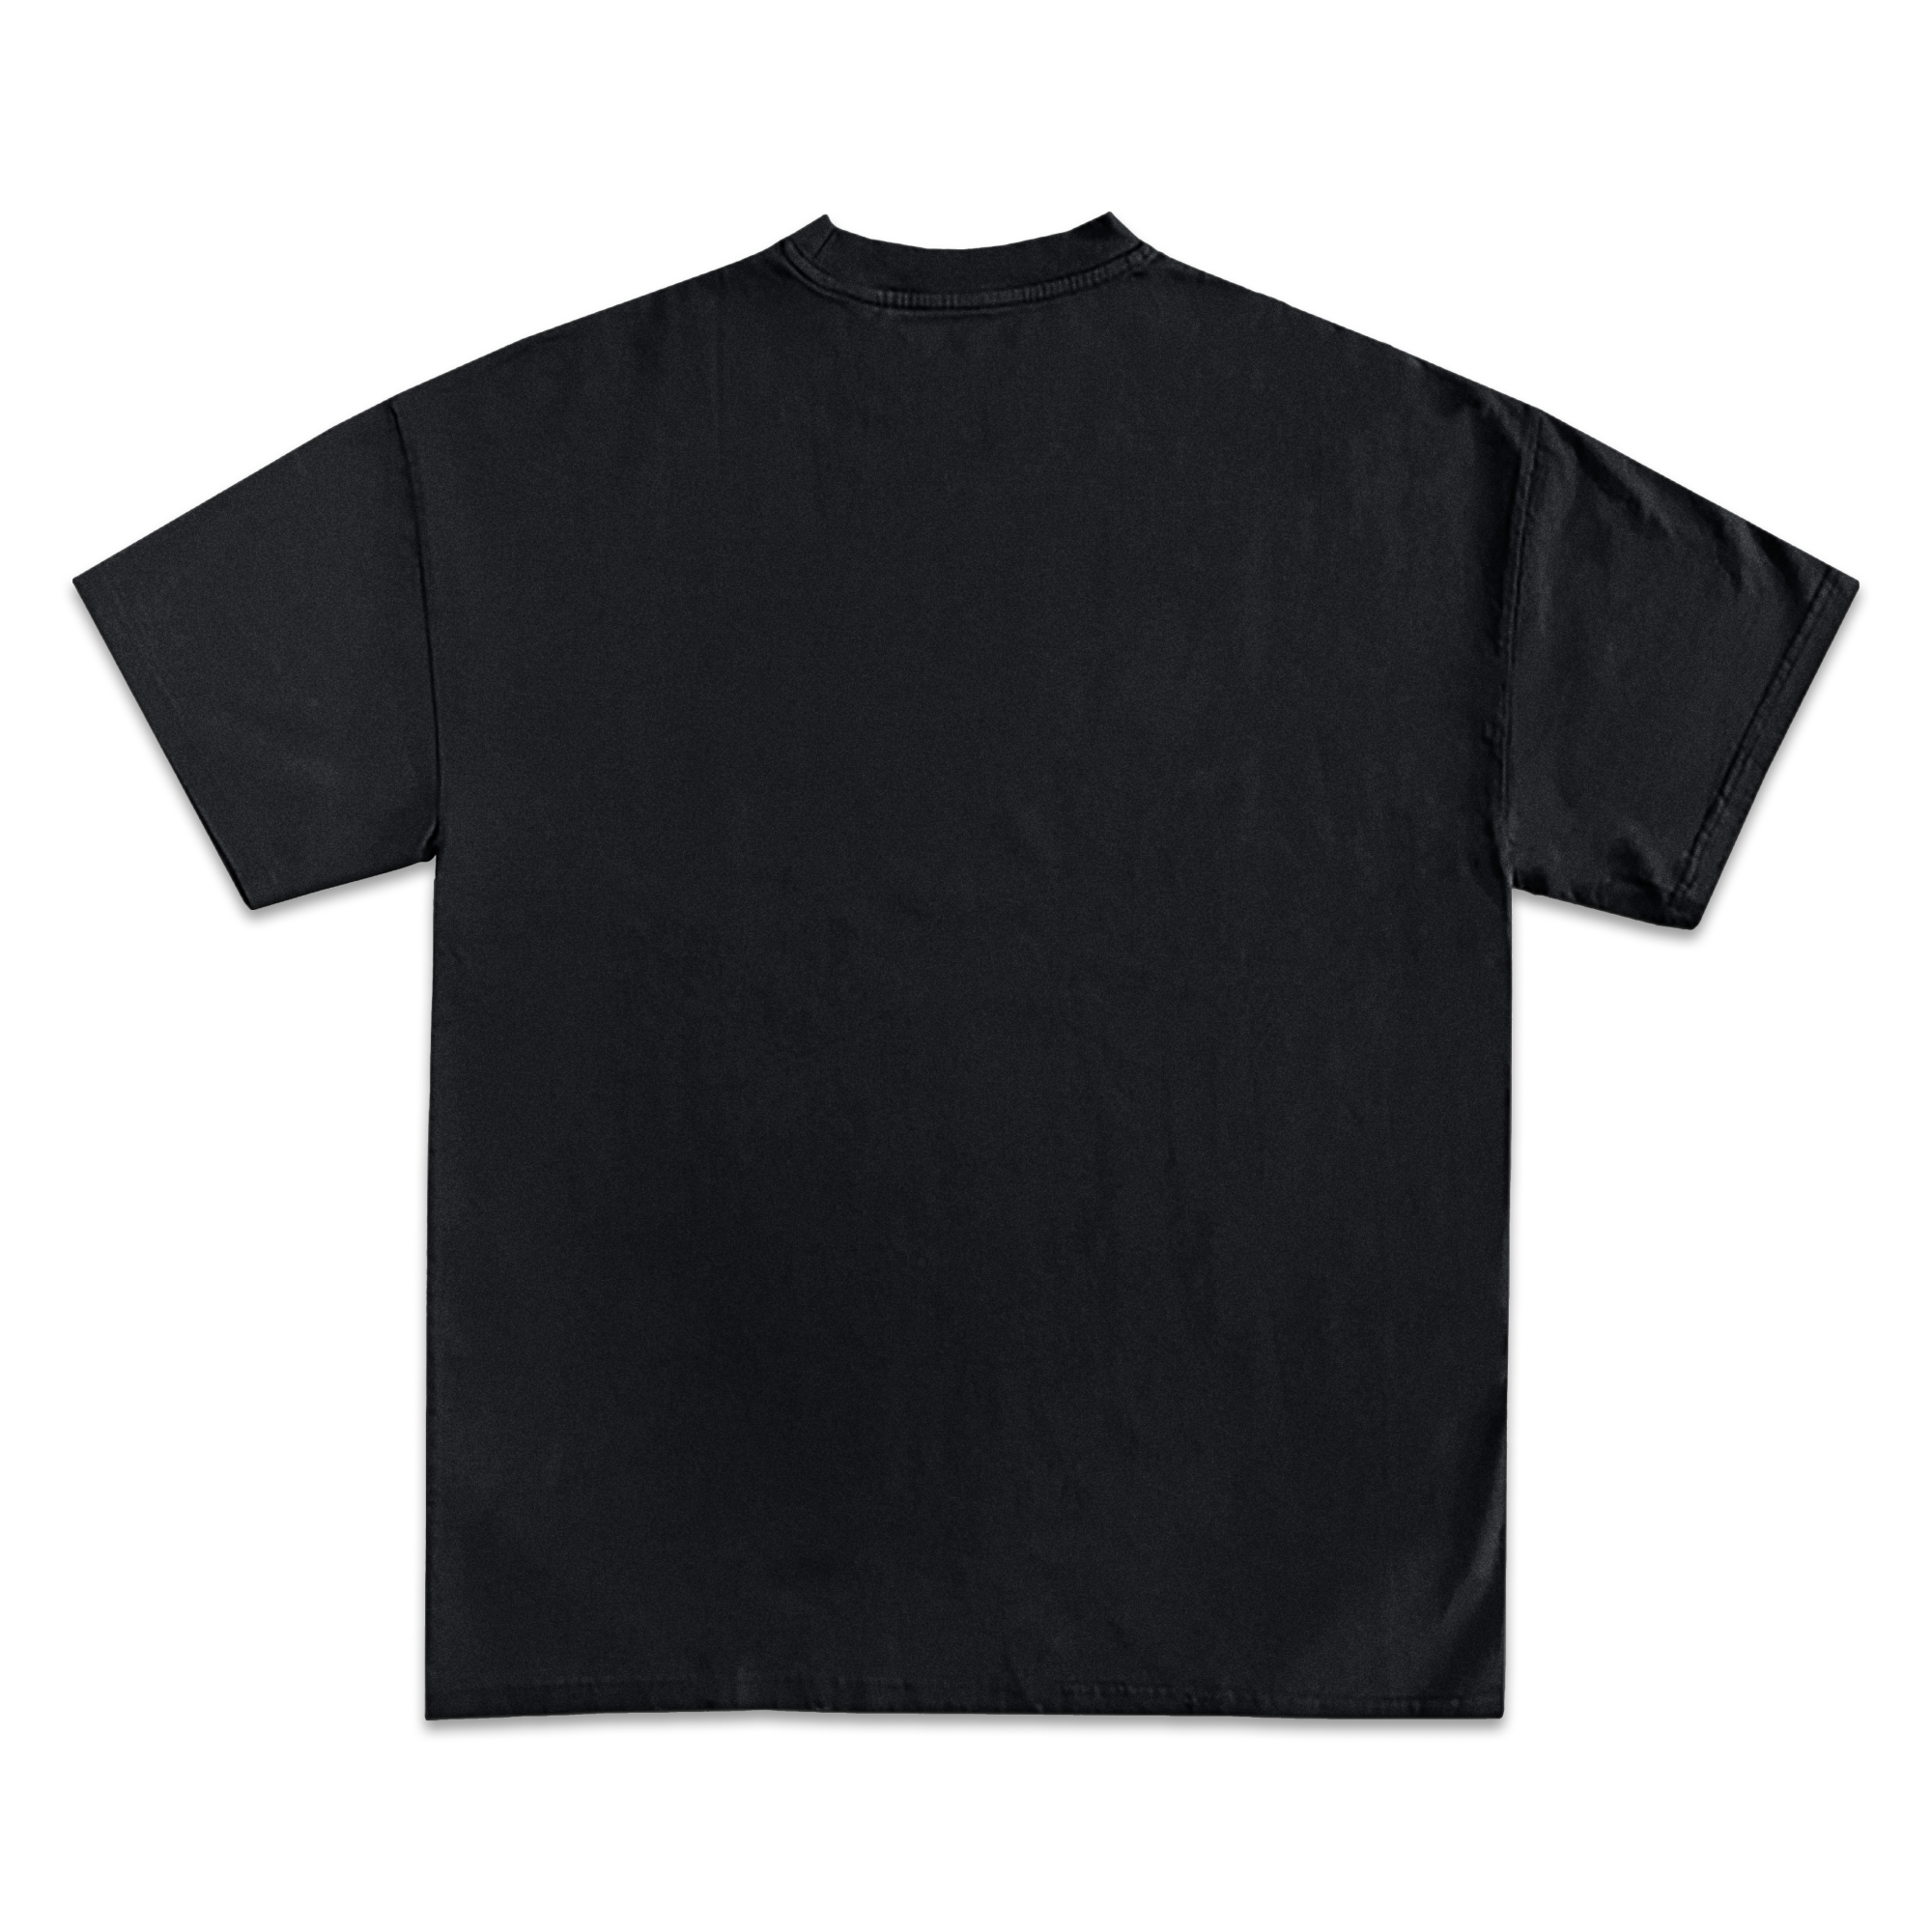 Kanye West Icy Exclusive Graphic T-Shirt